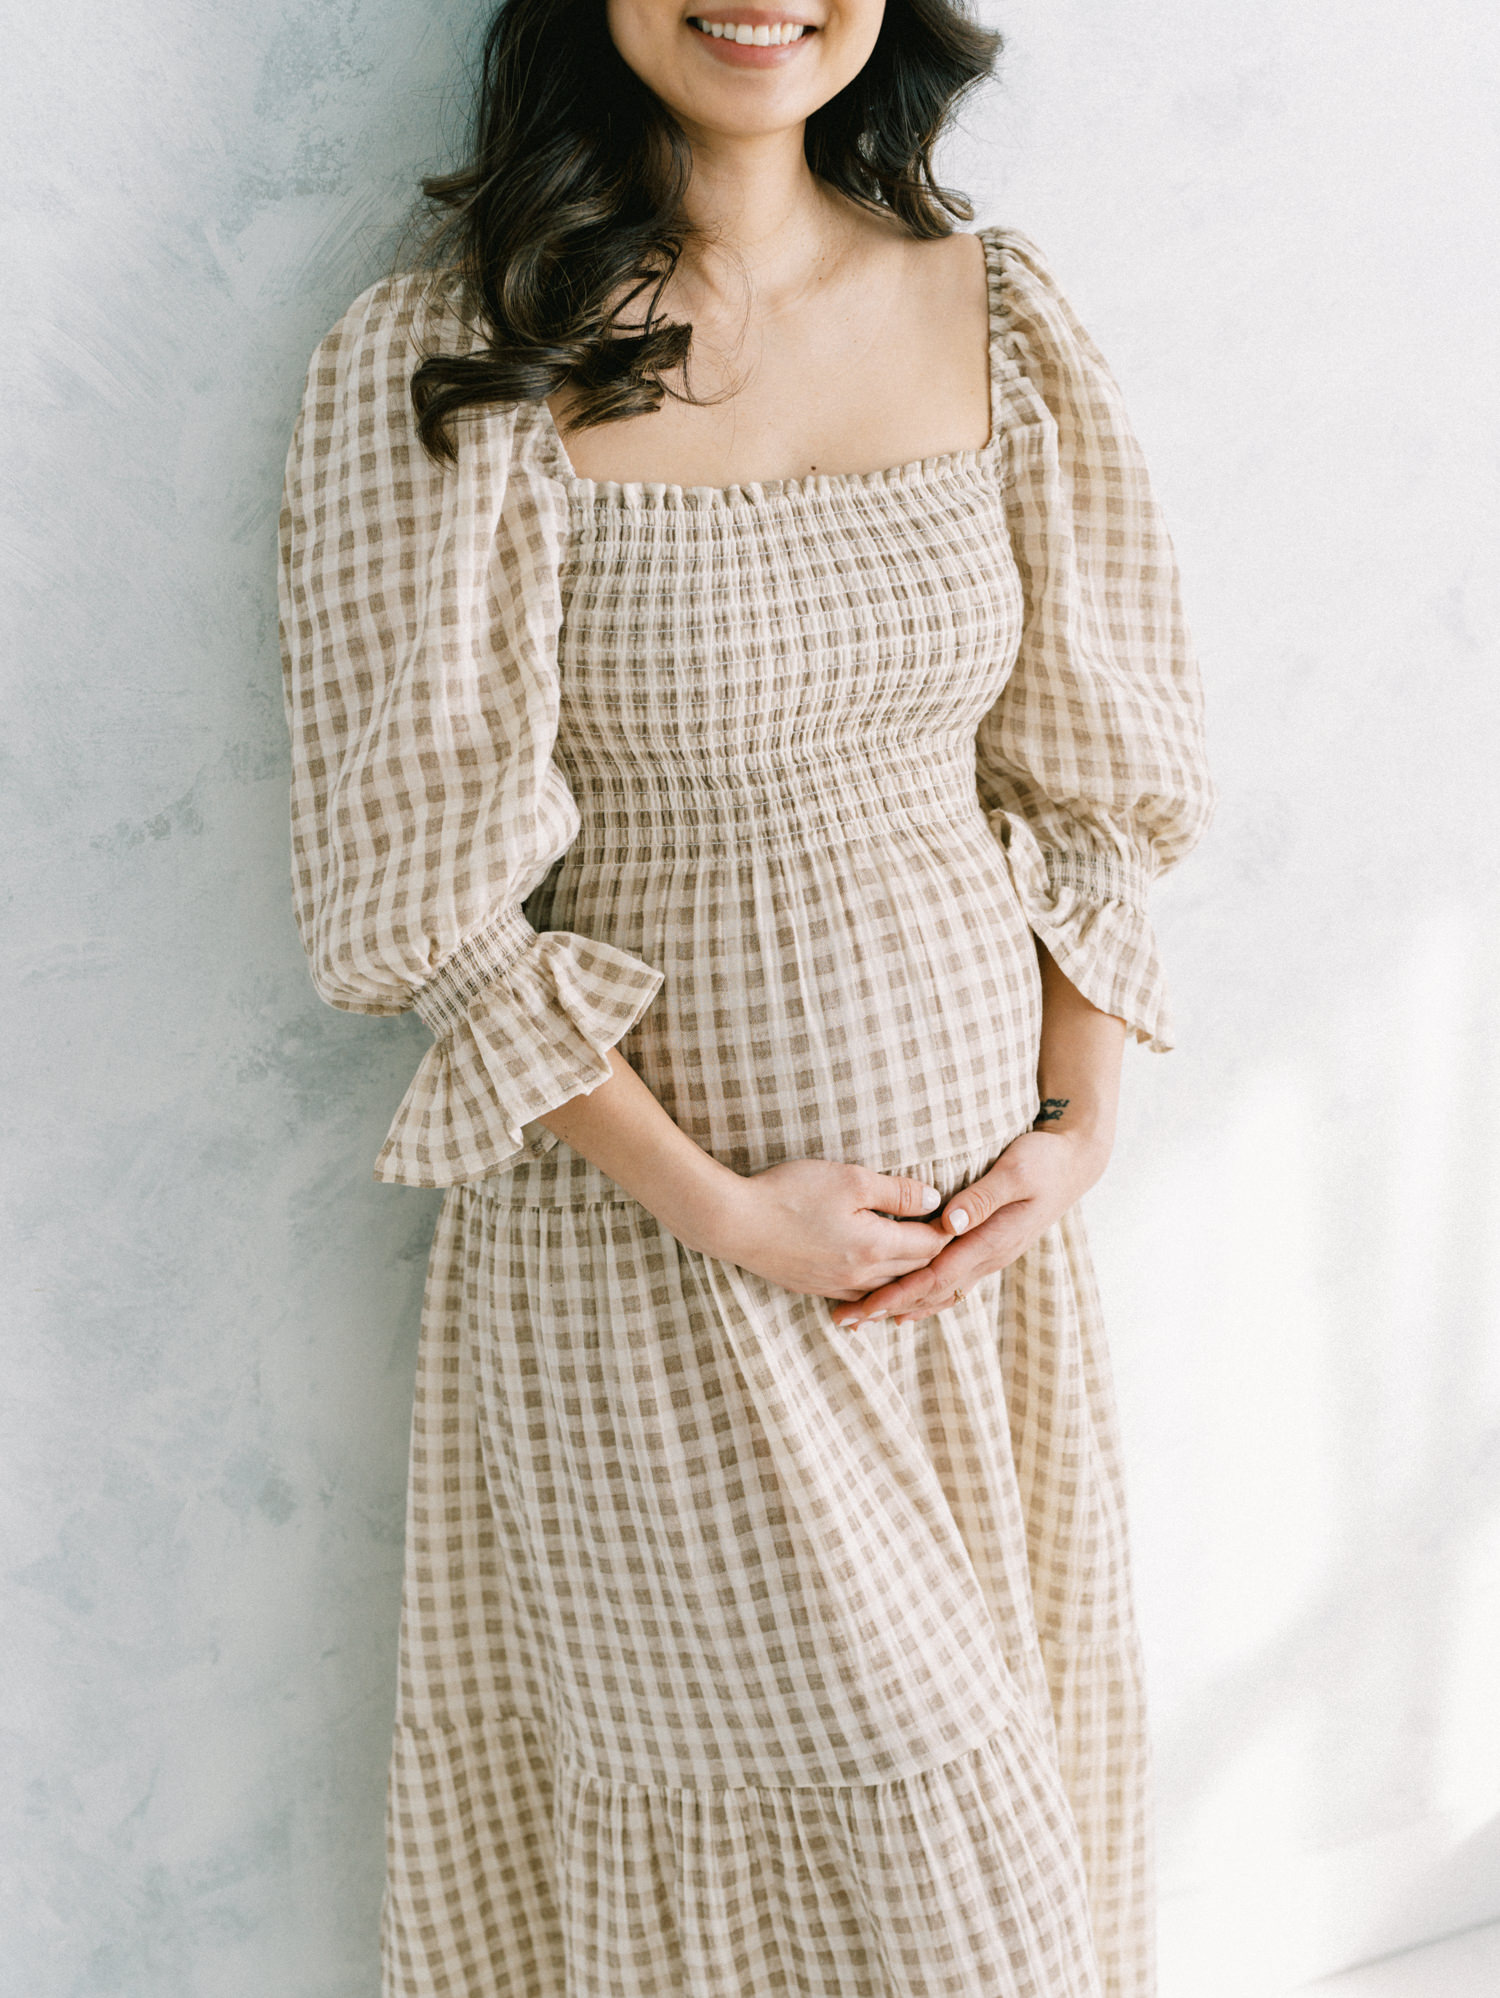 cropped image showing just the smile and torso of an expecting mother cradling her belly and wearing a beautiful simple maternity dress